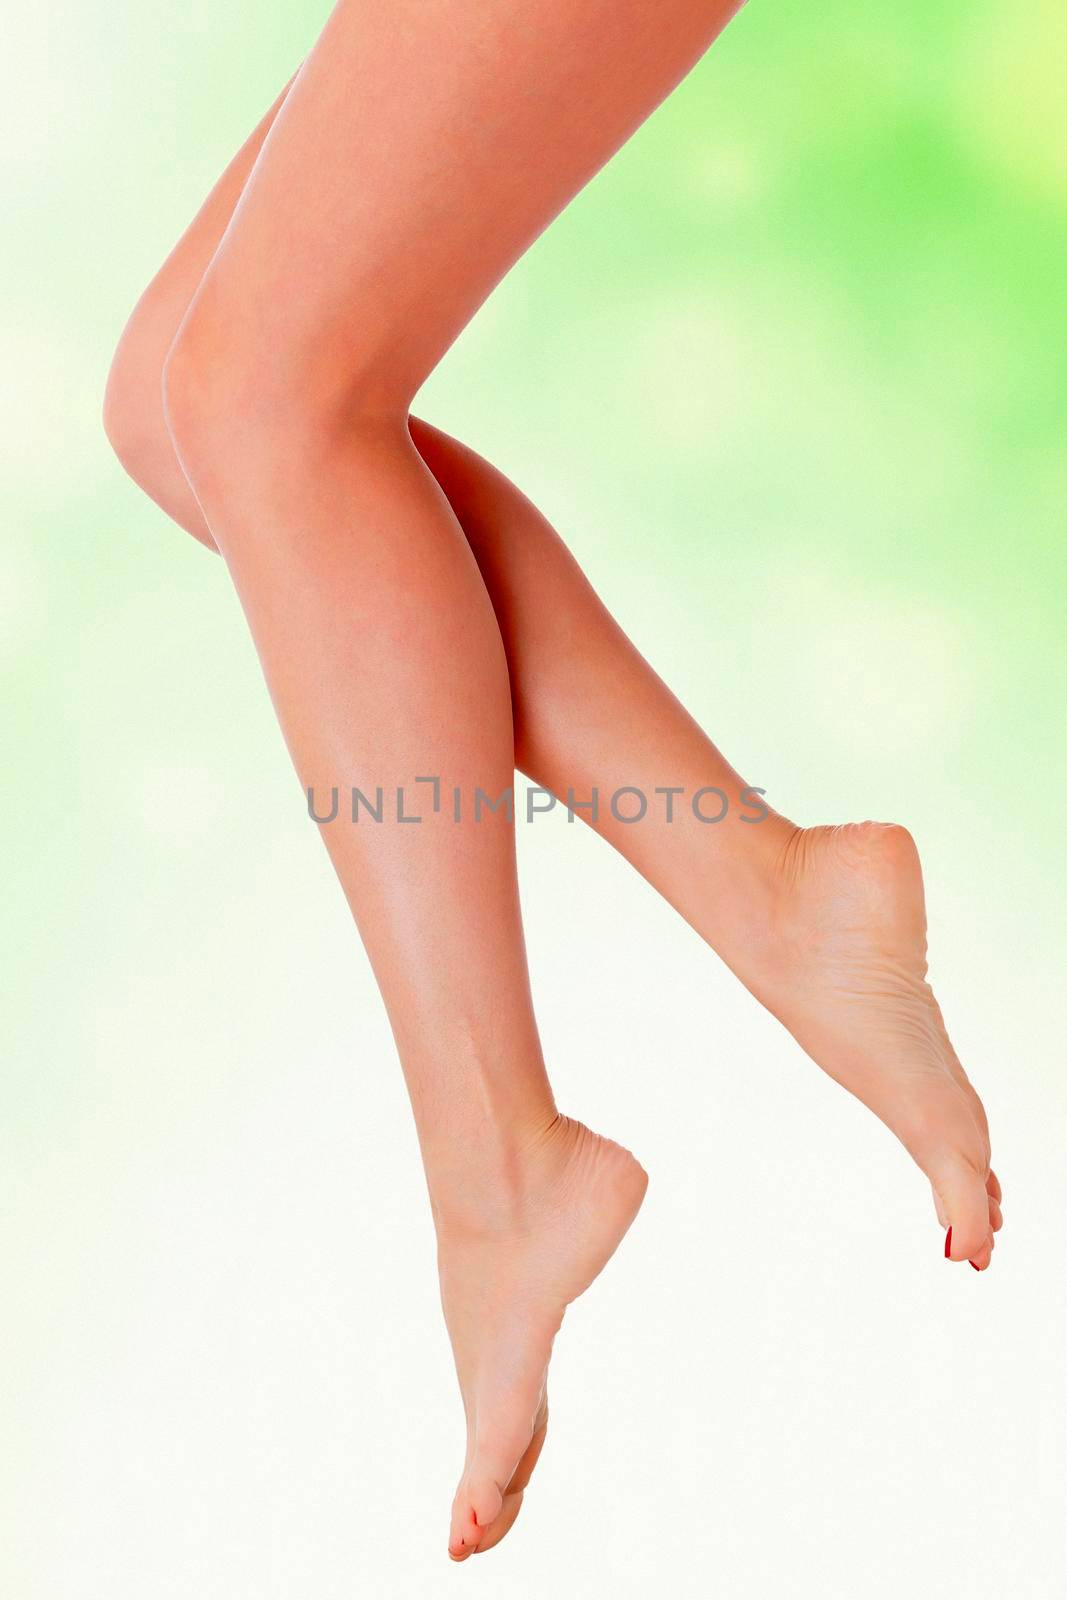 Legs in the air, green blurred background